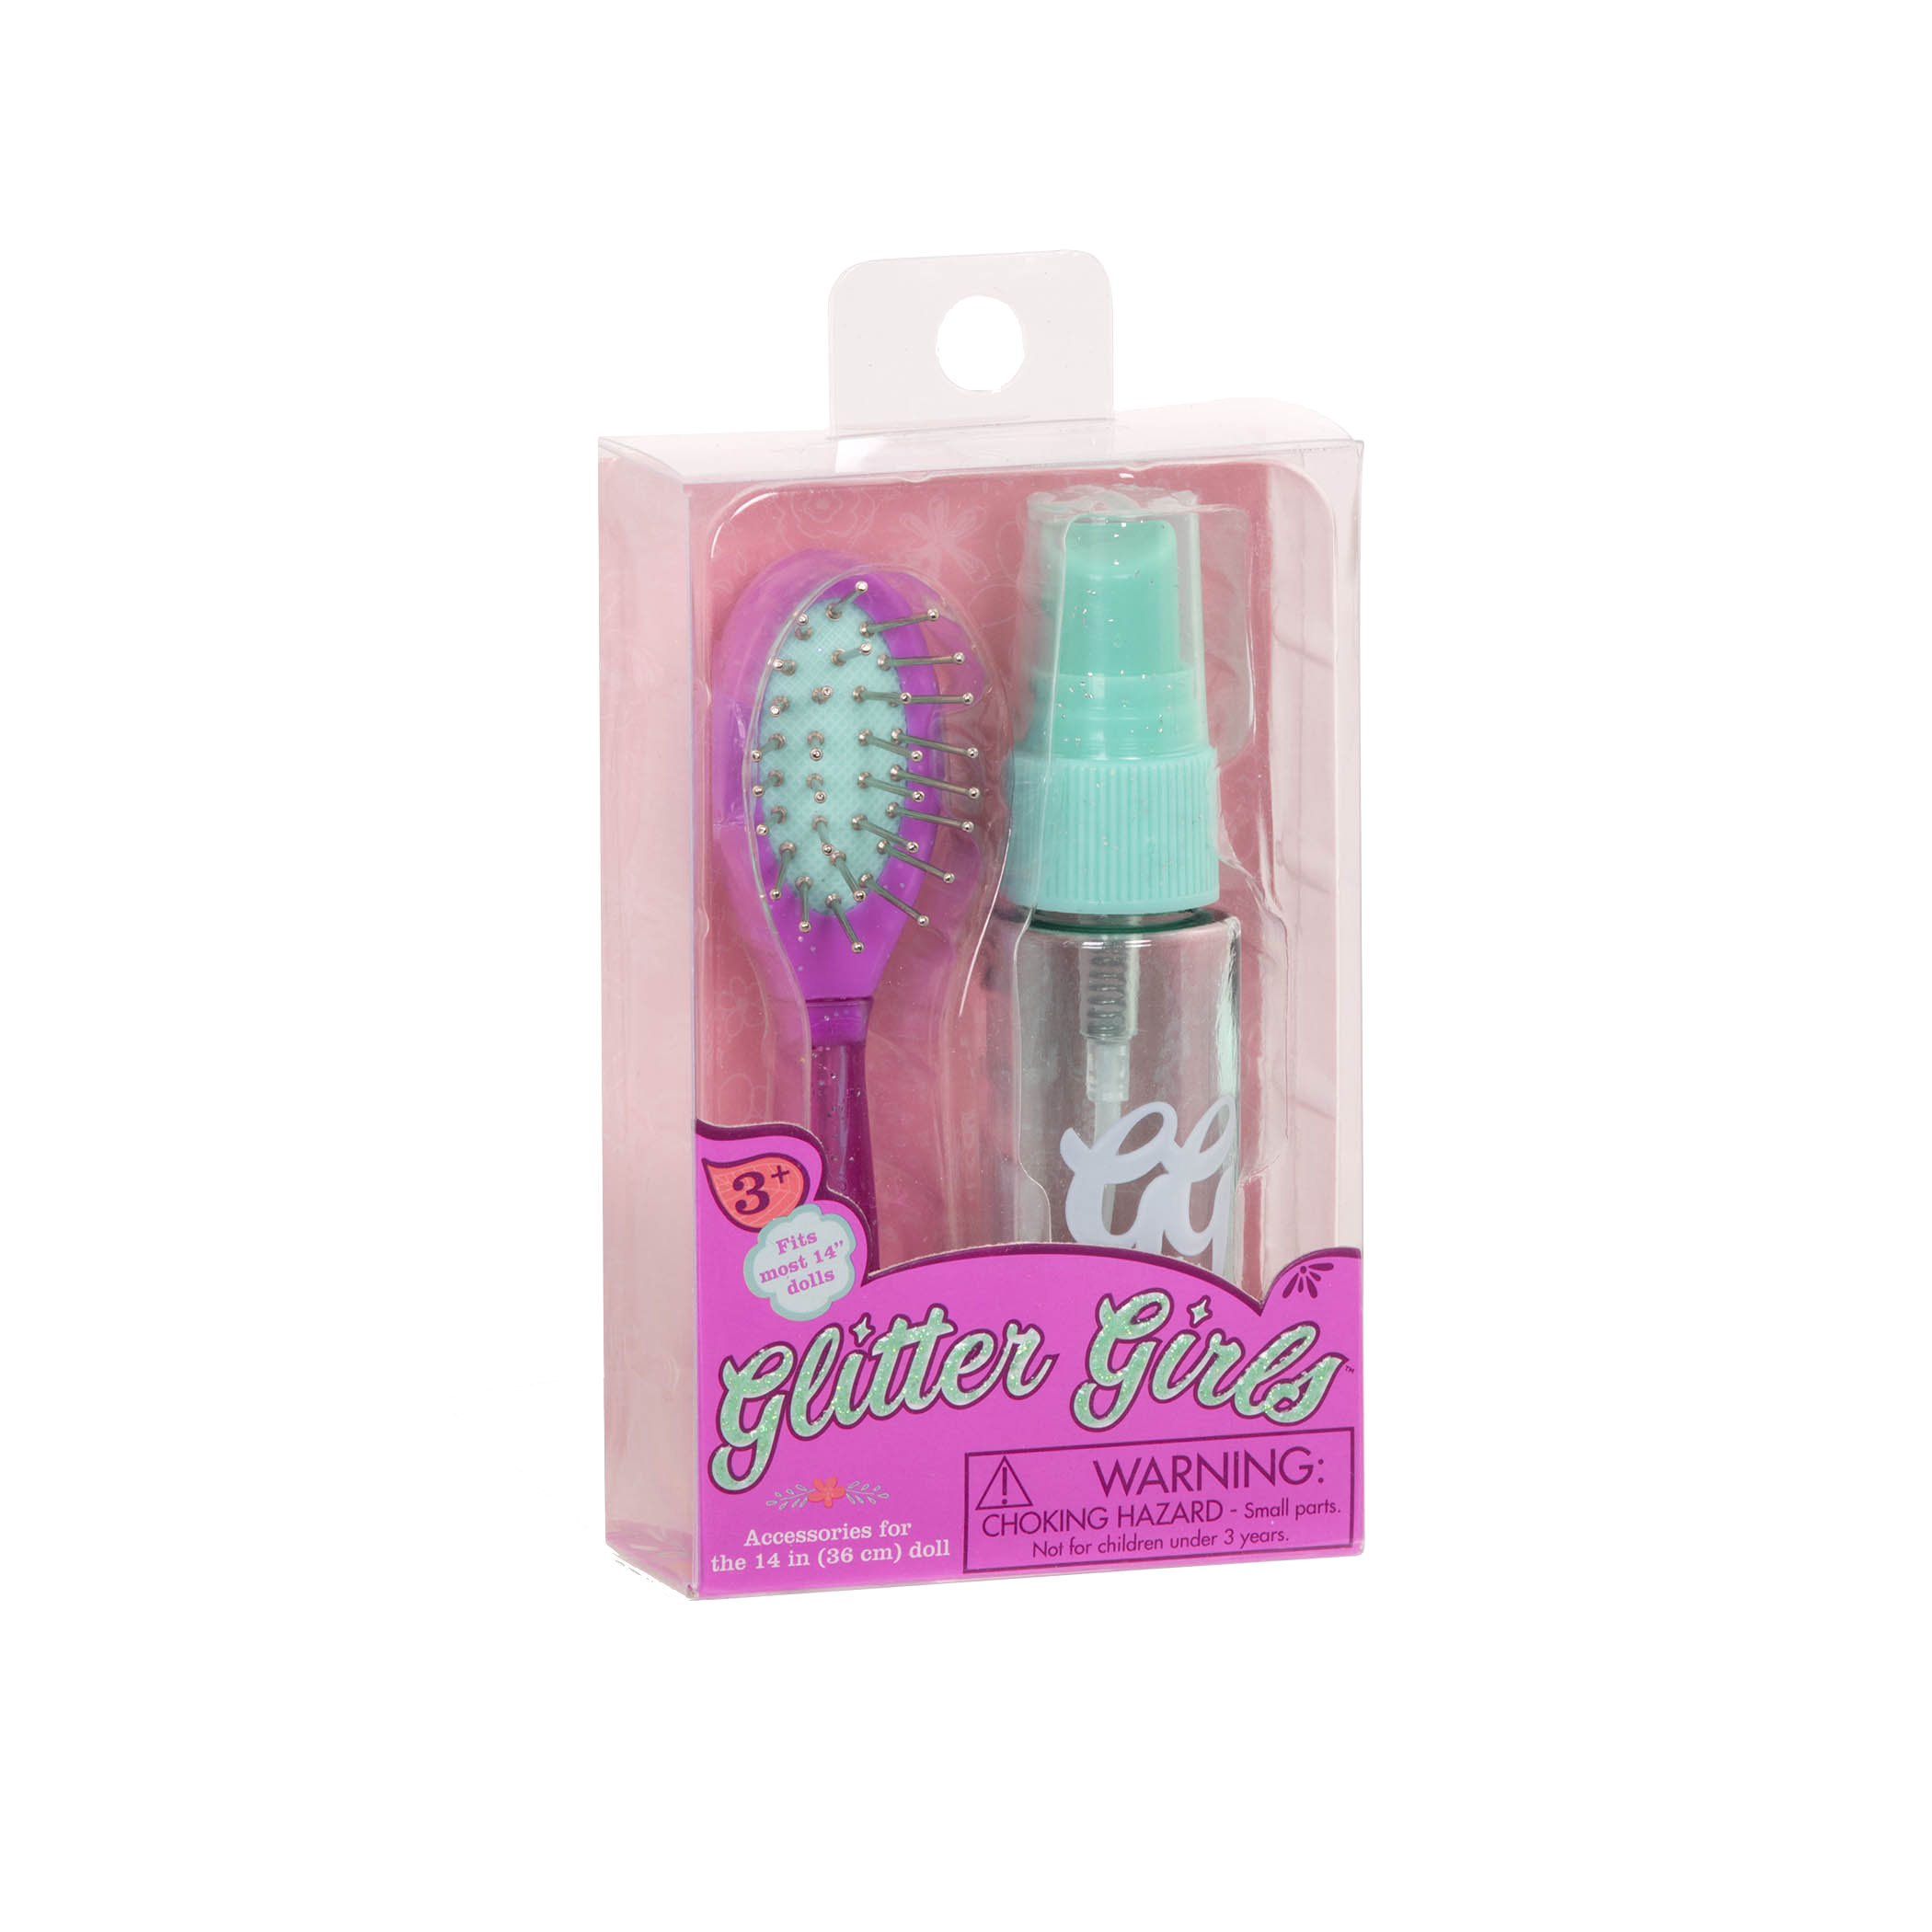 https://myglittergirls.com/wp-content/uploads/GG57022_Bedazzling-brush-and-spray-bottle-package02.png